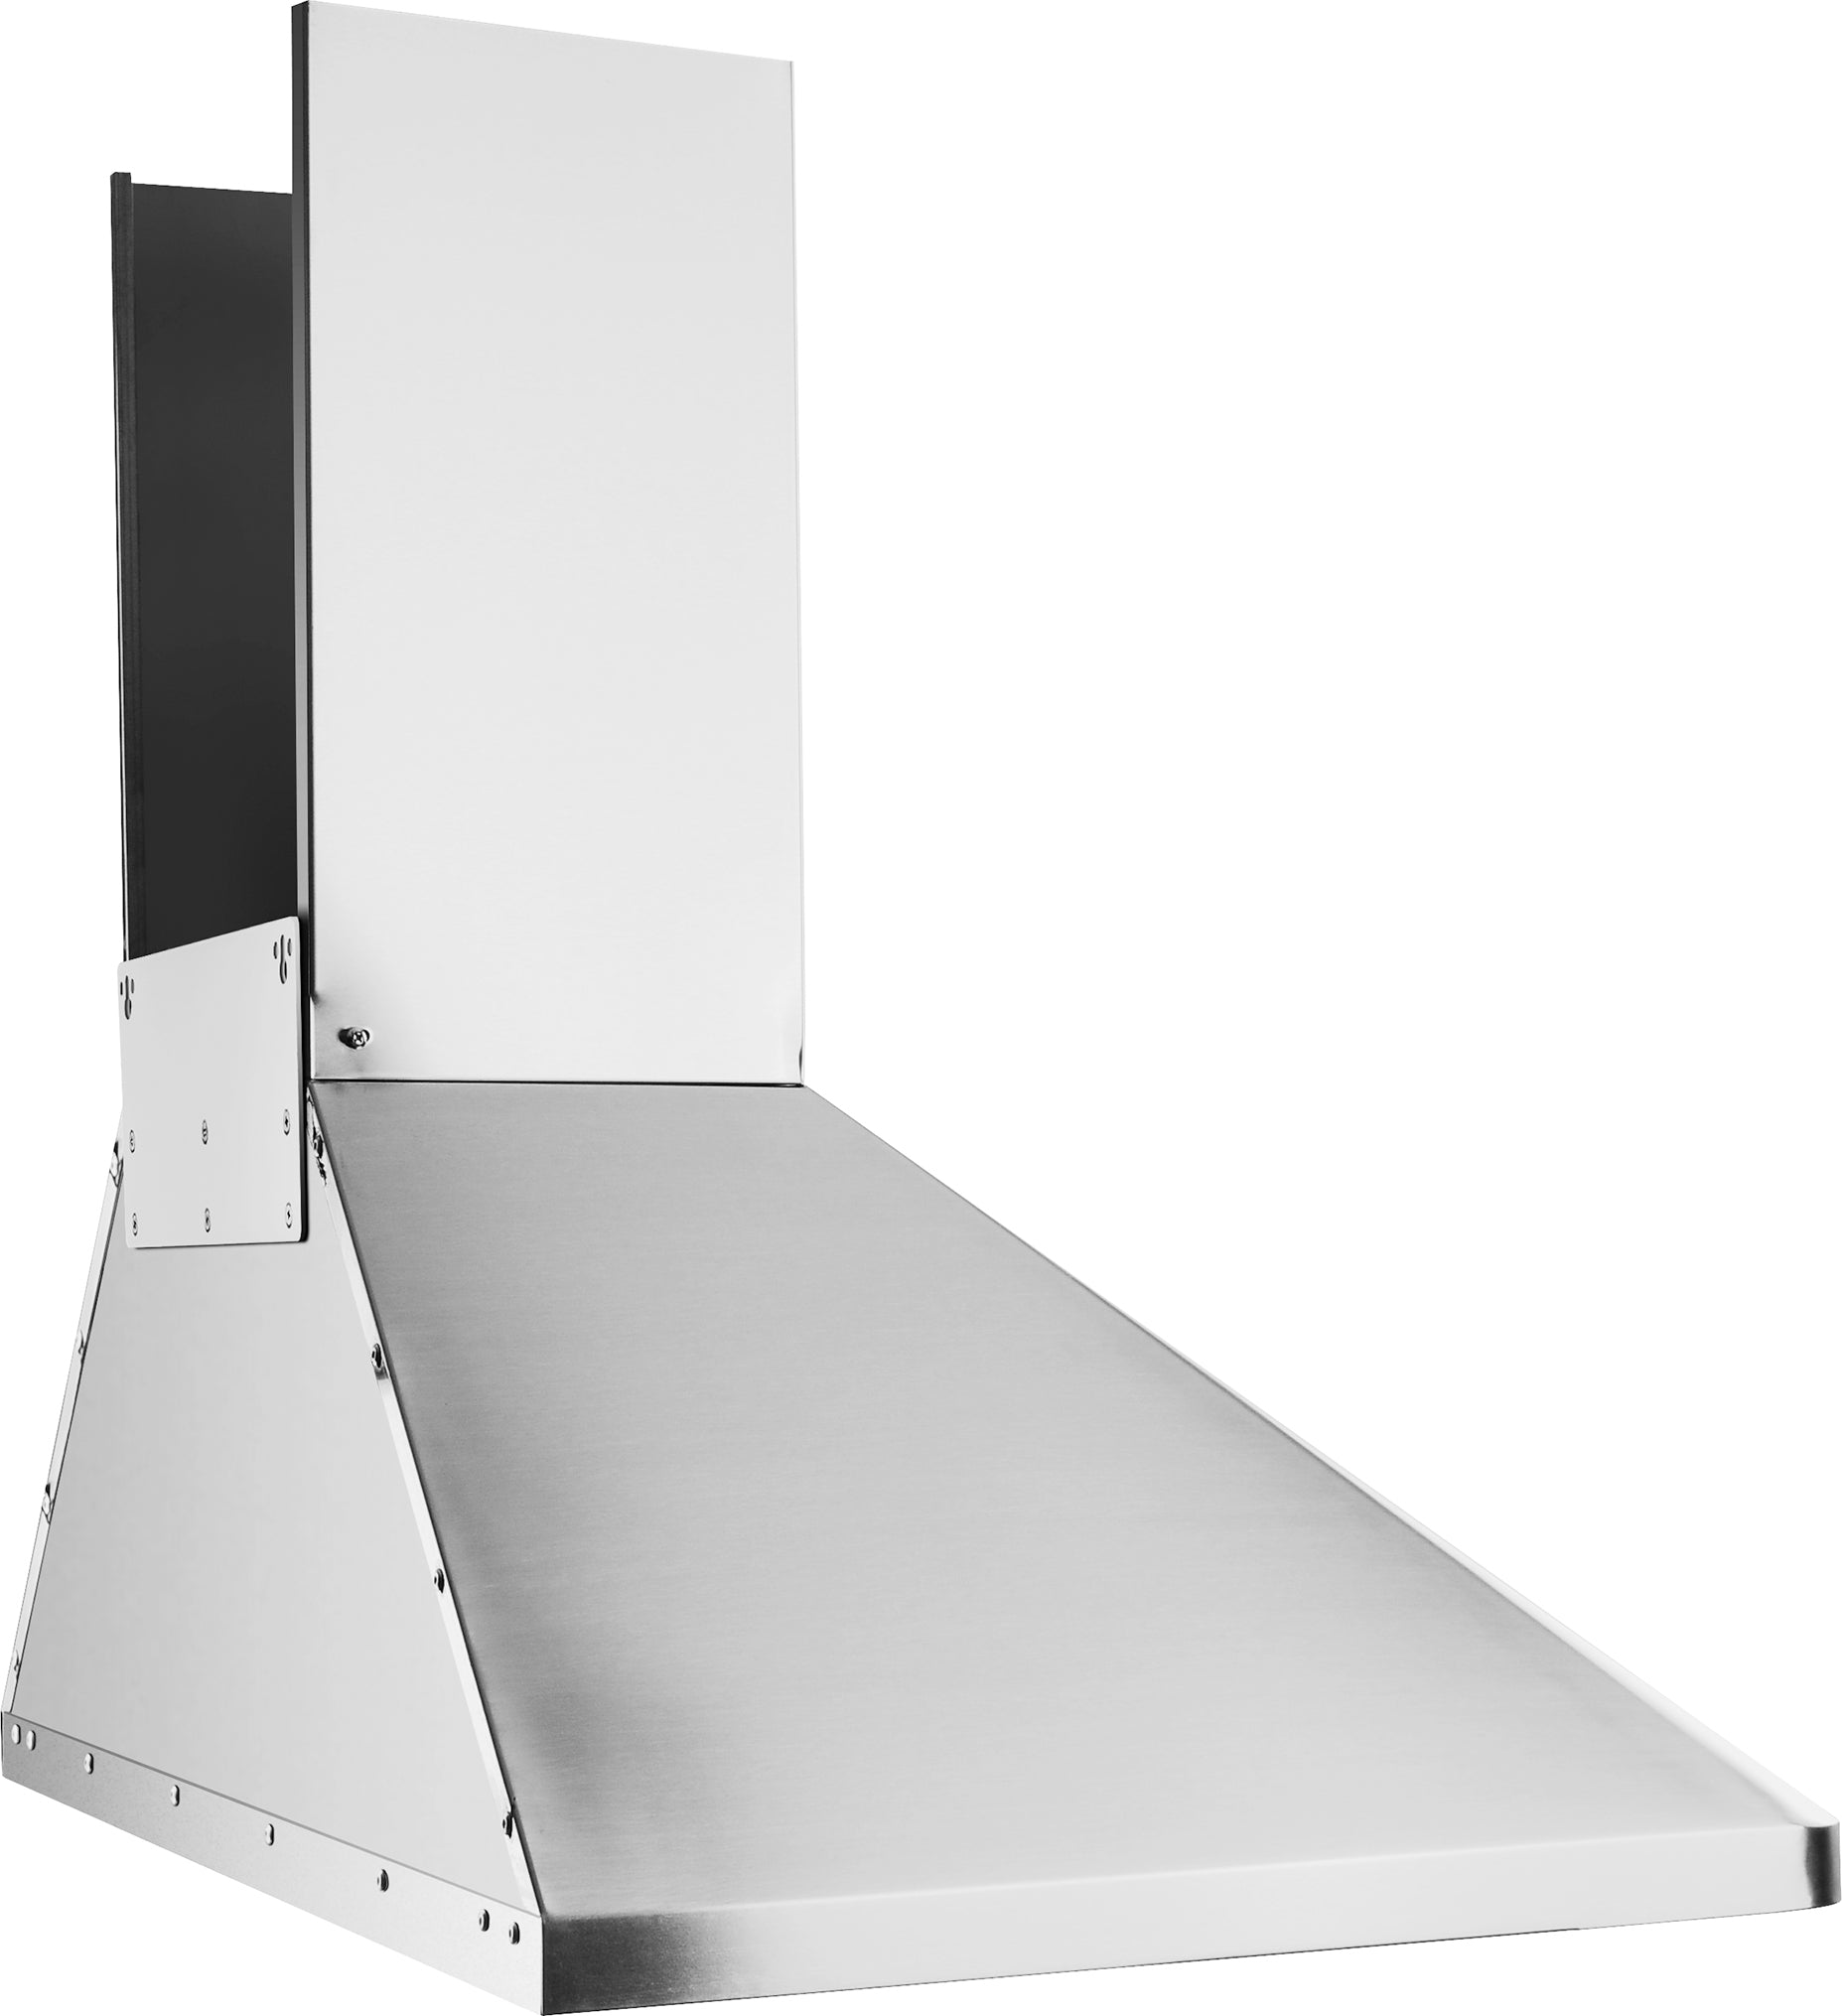 Wall Chef LED 36 in. 600 CFM Ducted Wall Mount Range Hood